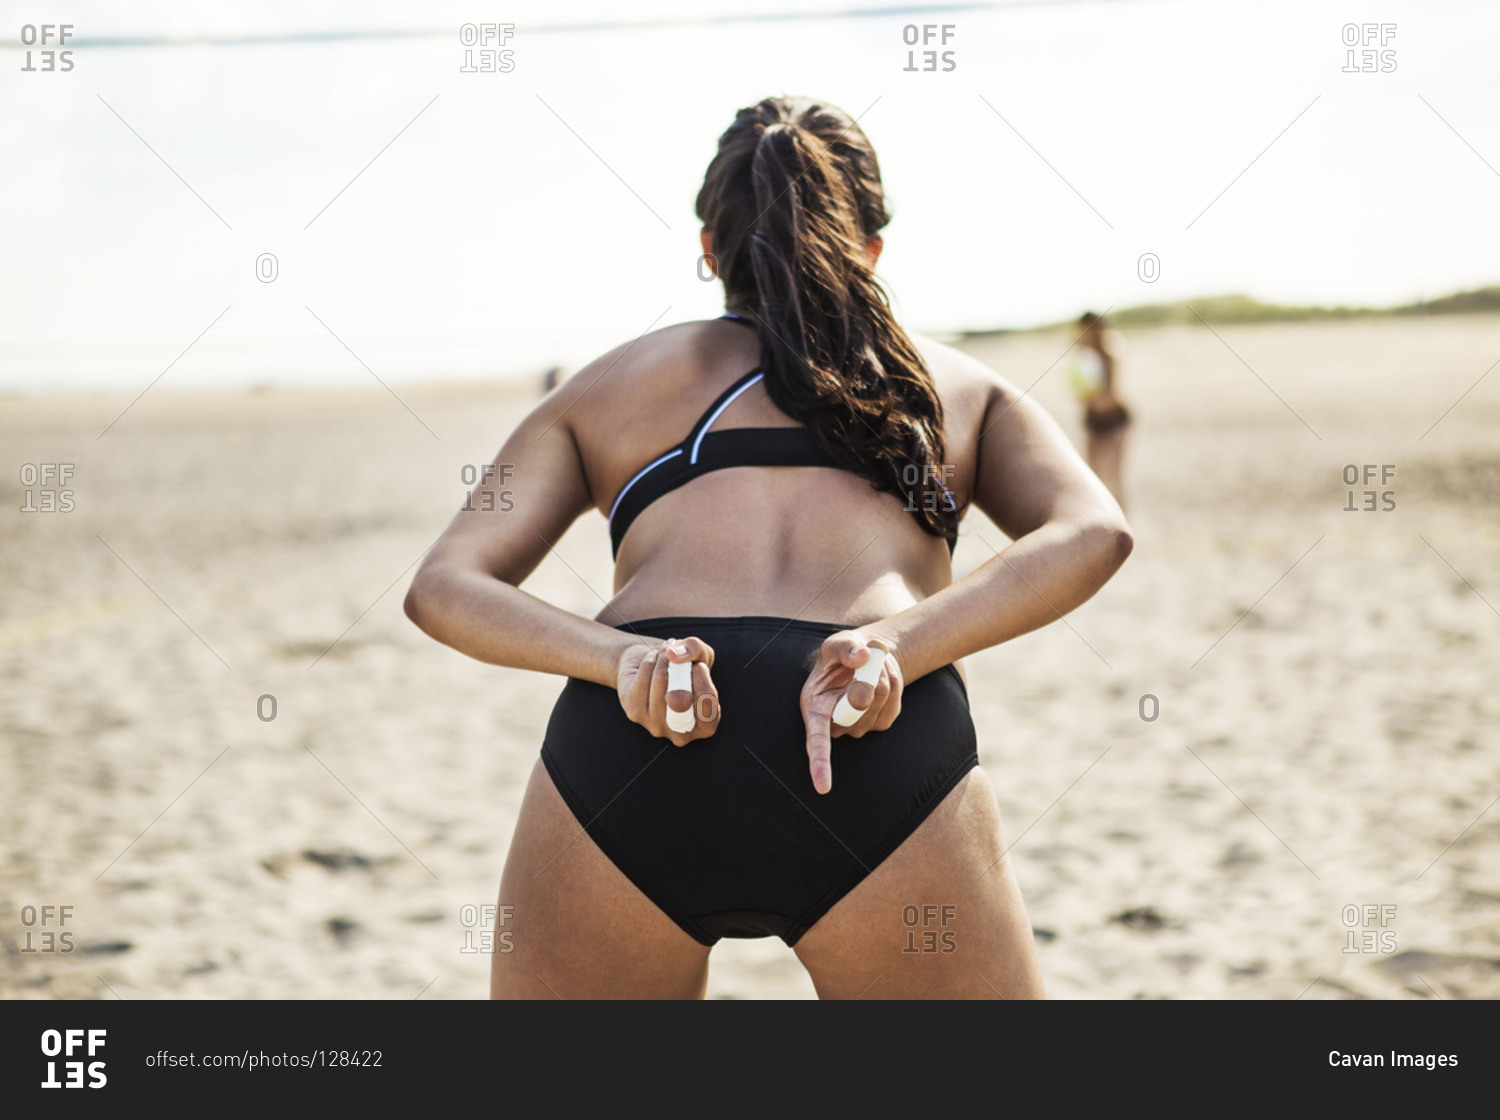 Beach volleyball player use hand signal